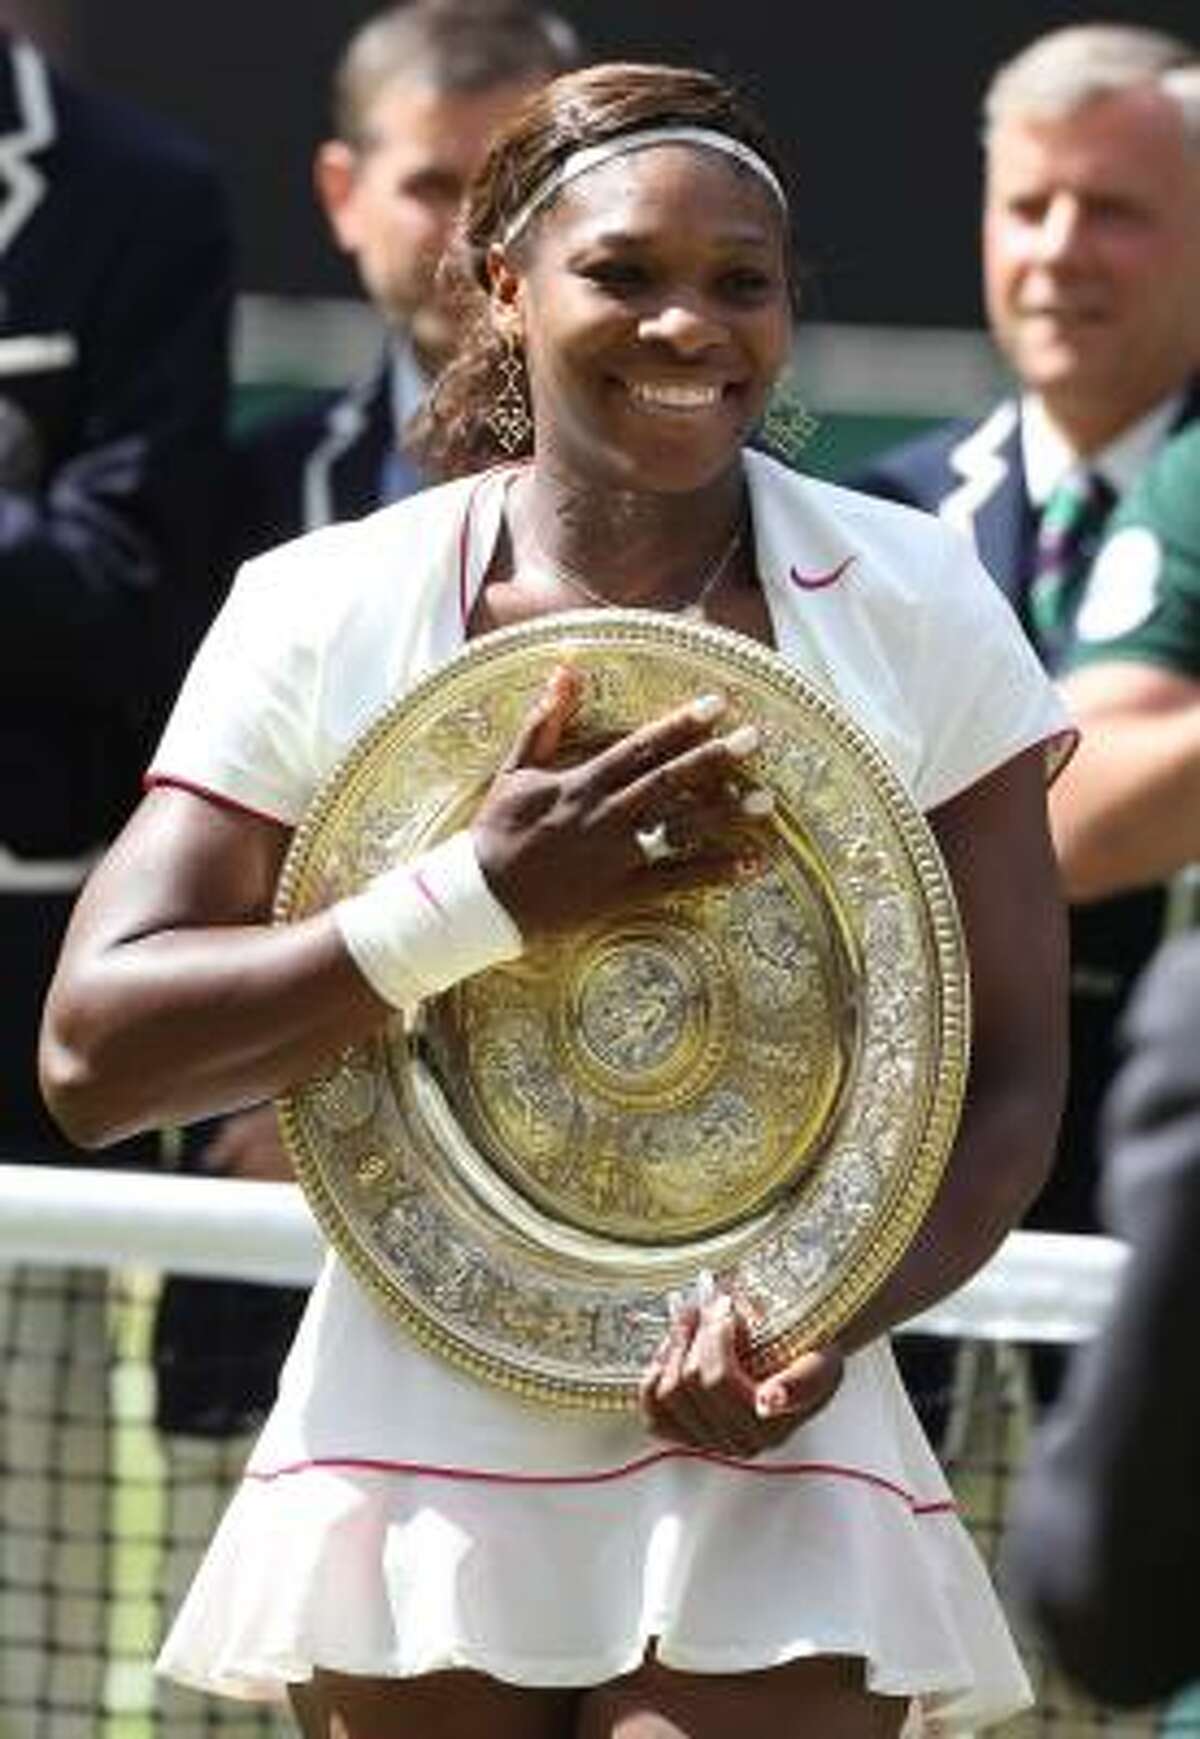 Serena Williams, who has won five of the last eight major tournaments, moved ahead of Billie Jean King into sole possession of sixth place on the all-time list of women’s Grand Slam champions with 13, the most of any active woman player.